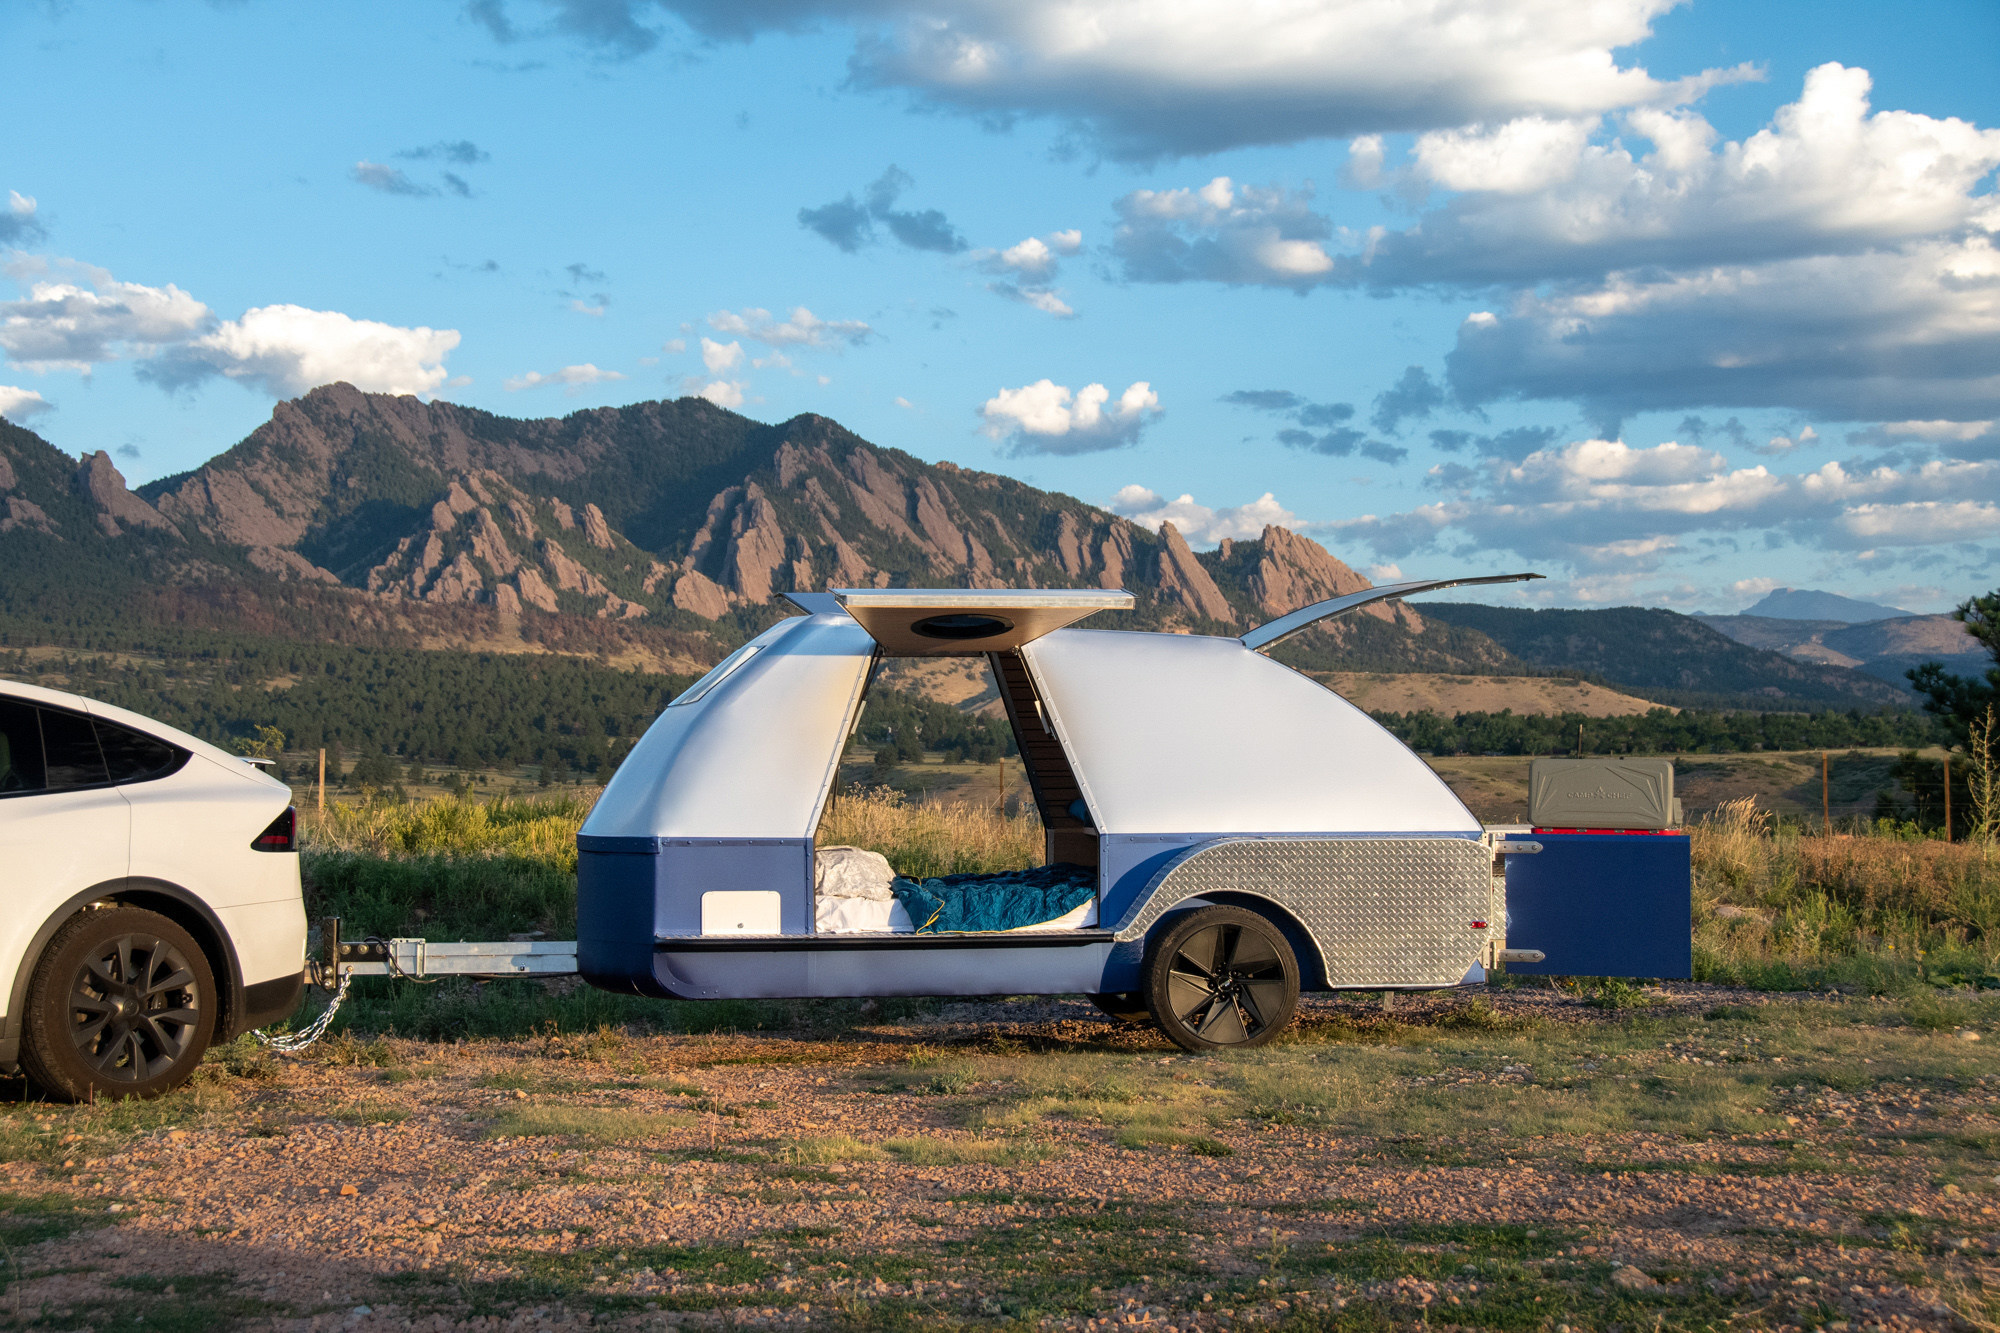 Teardrop camping trailer boosts EV driving range—with lots of batteries on board